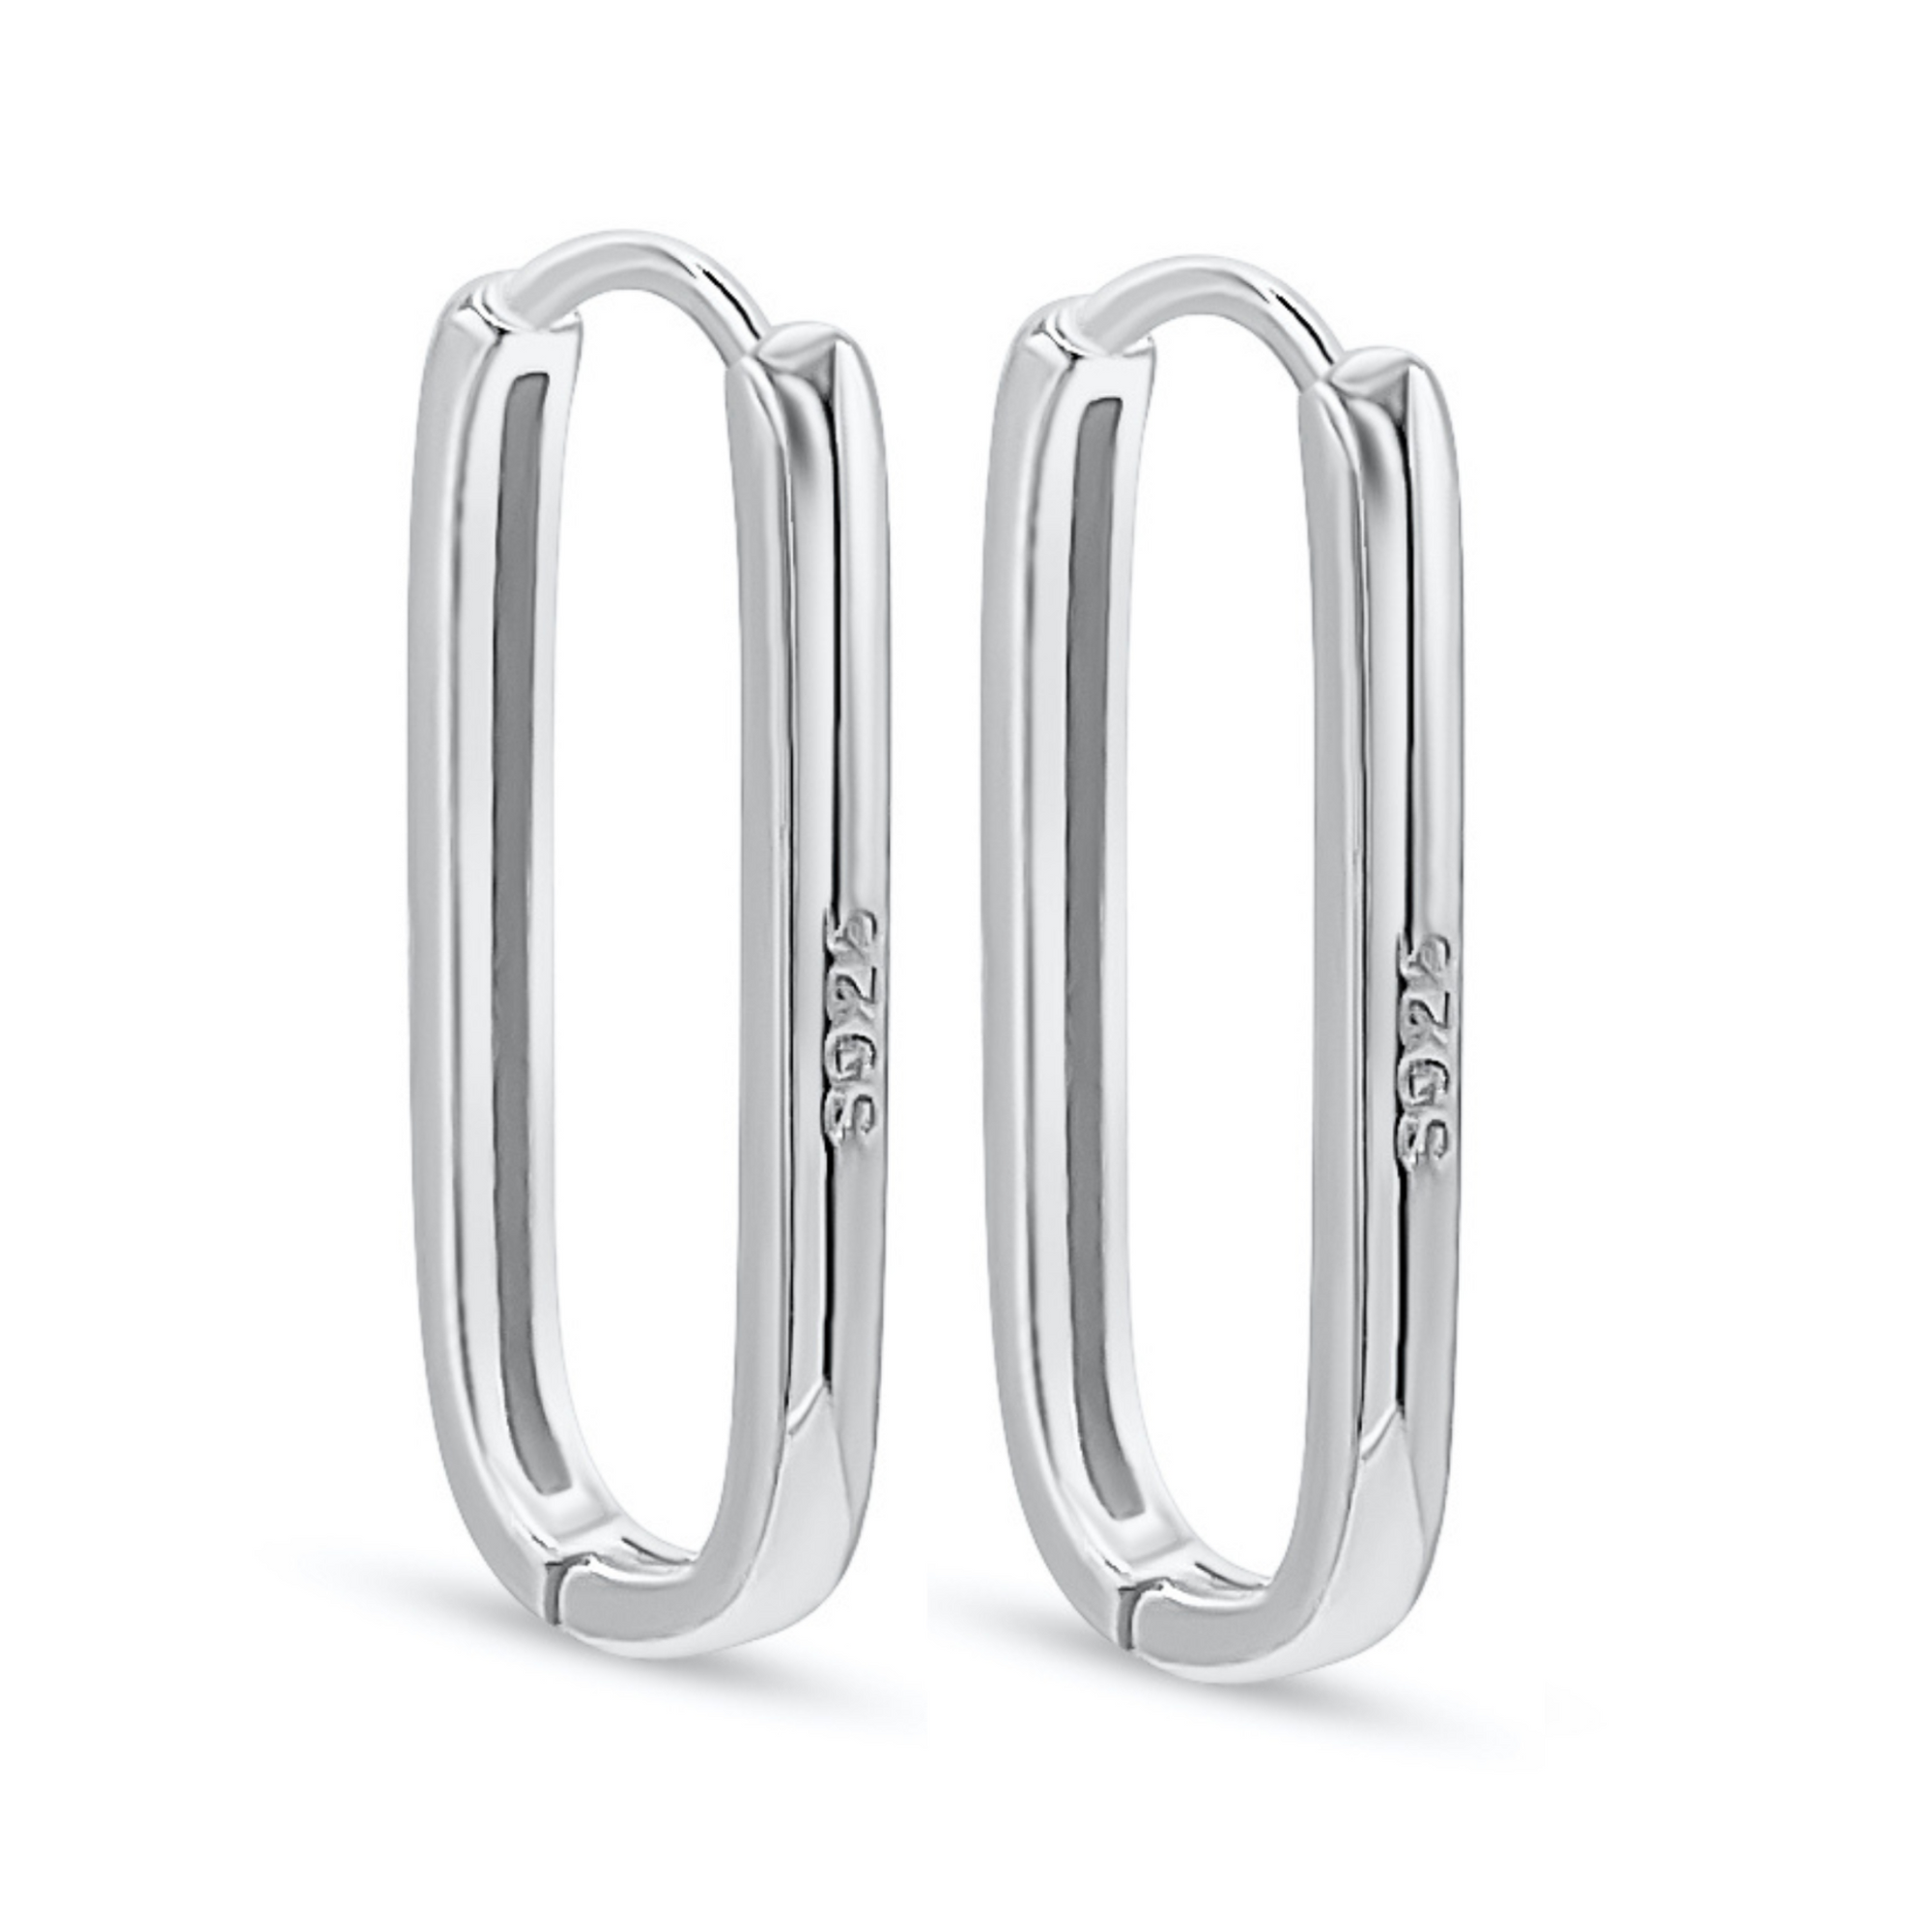 Square Oval Hoops